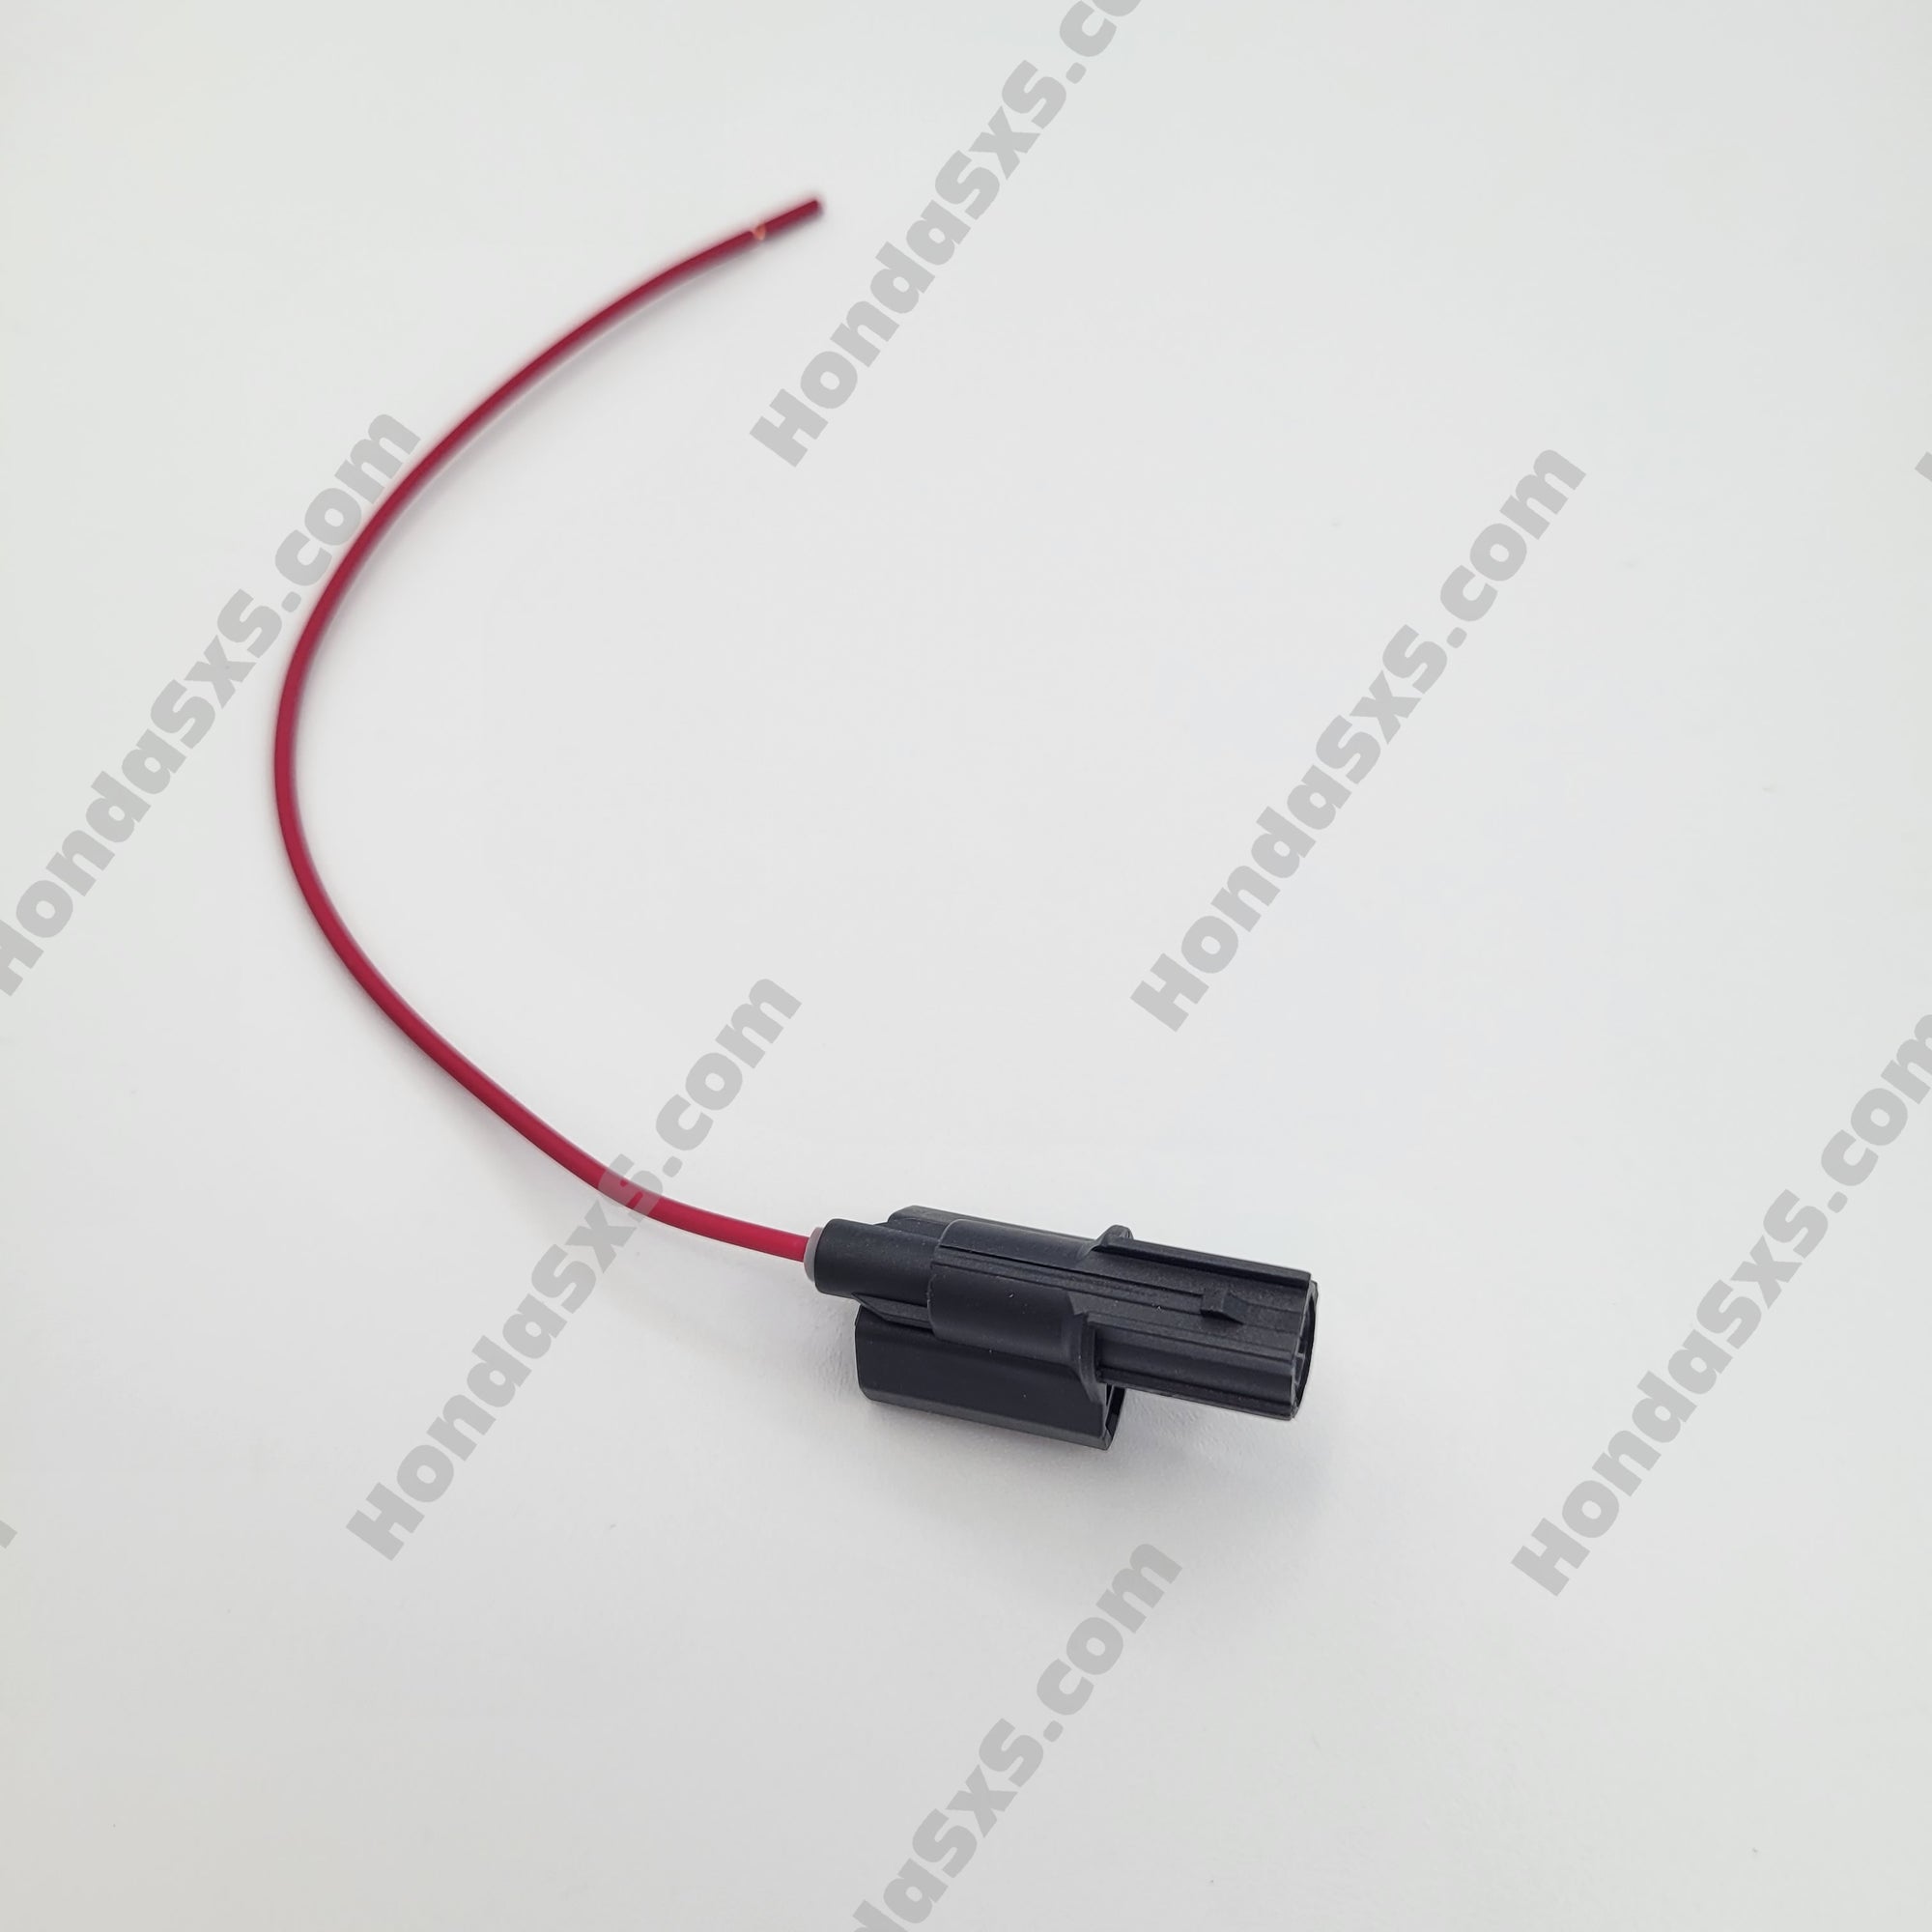 Power Vision 3 for Honda Pioneer 1000 (with 6-Pin Diagnostic